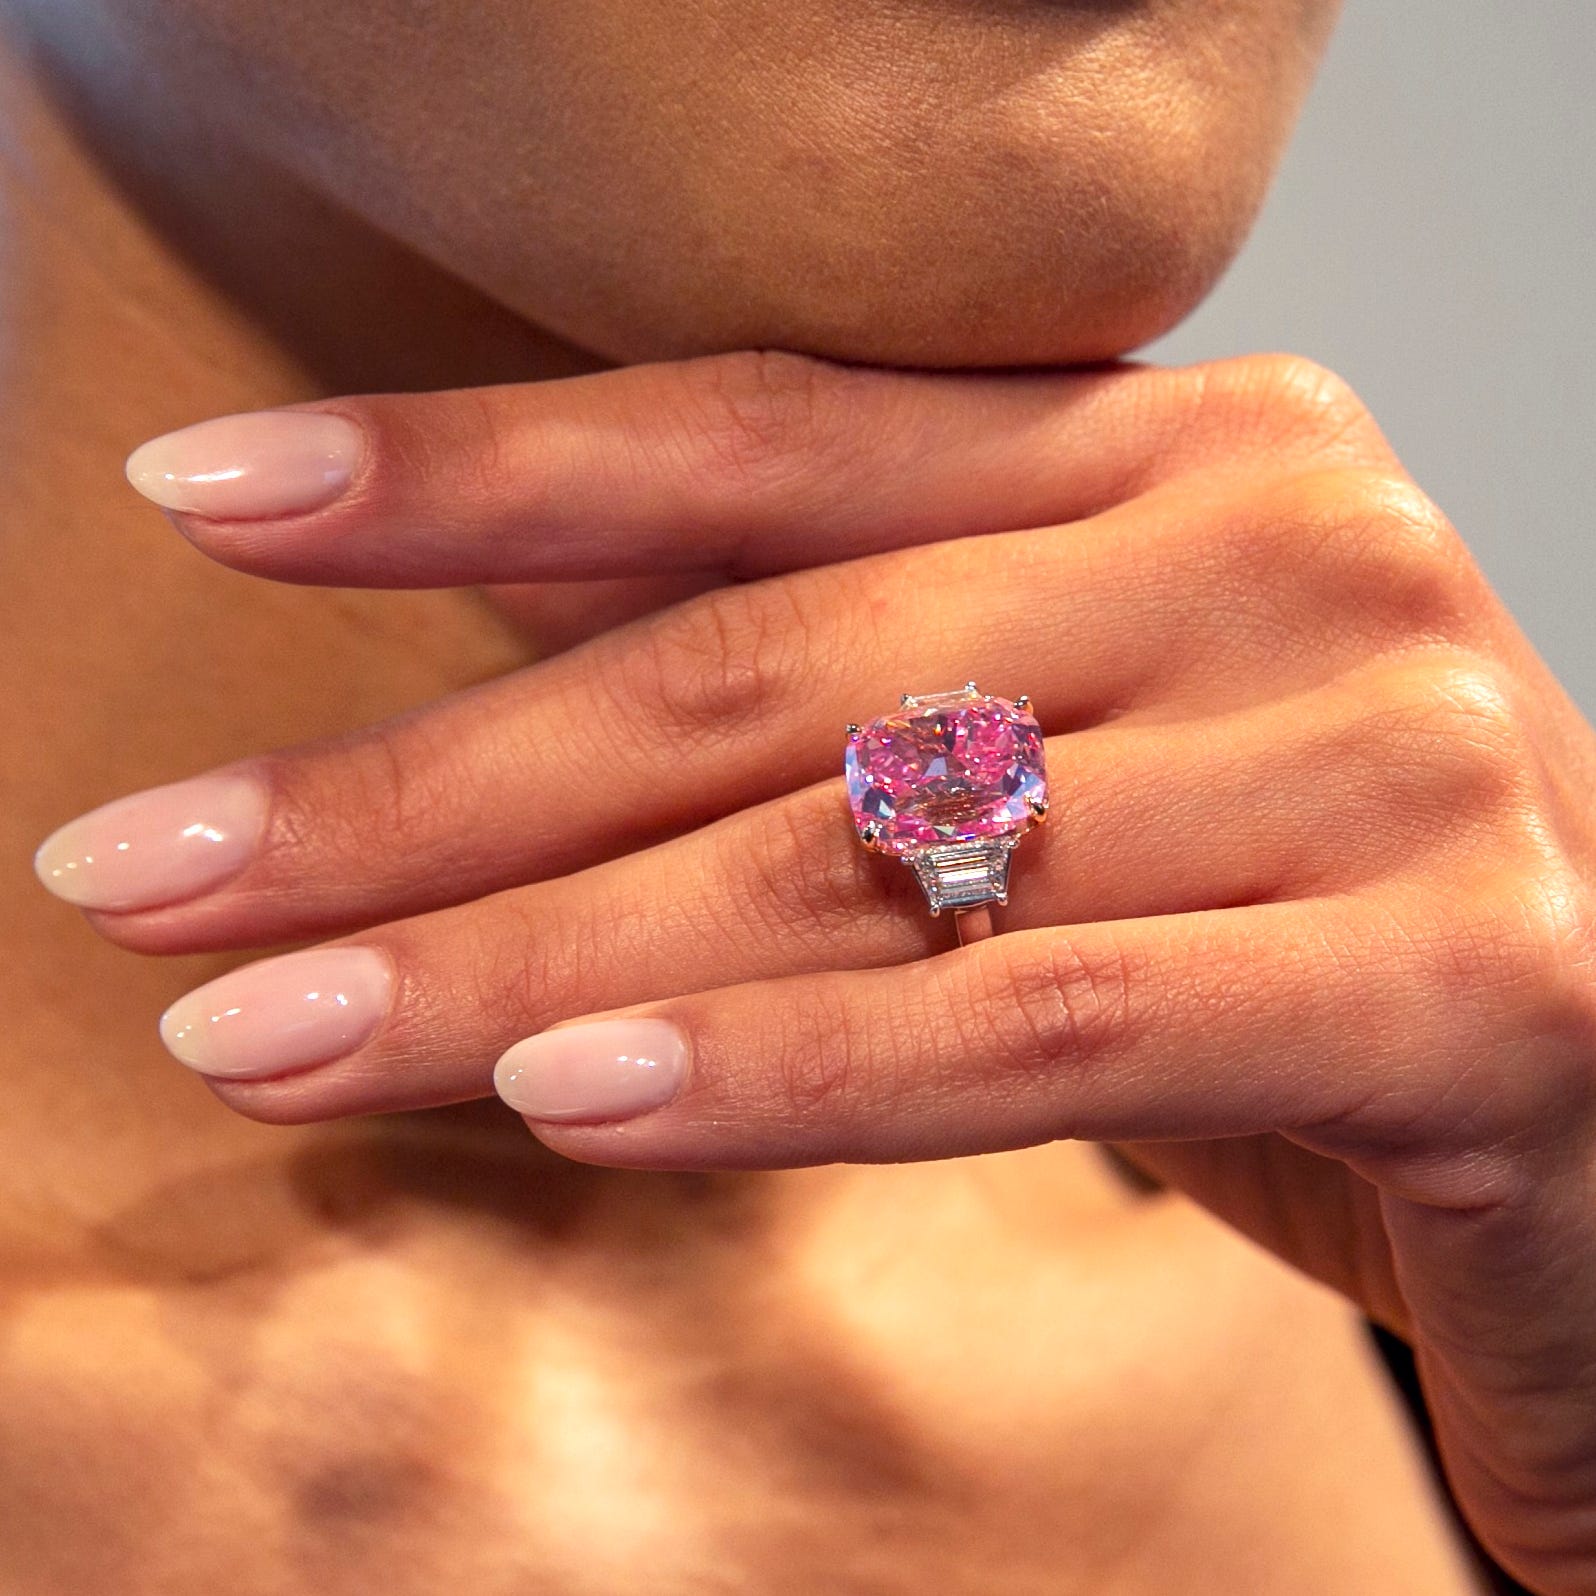 Model Paula Nissen wears a 10.57-carat purplish-pink diamond called called The Eternal Pink diamond in New York City on Tuesday, March 28, 2023. Sotheby's auction house estimates the diamond will sell for over $35 million in June.